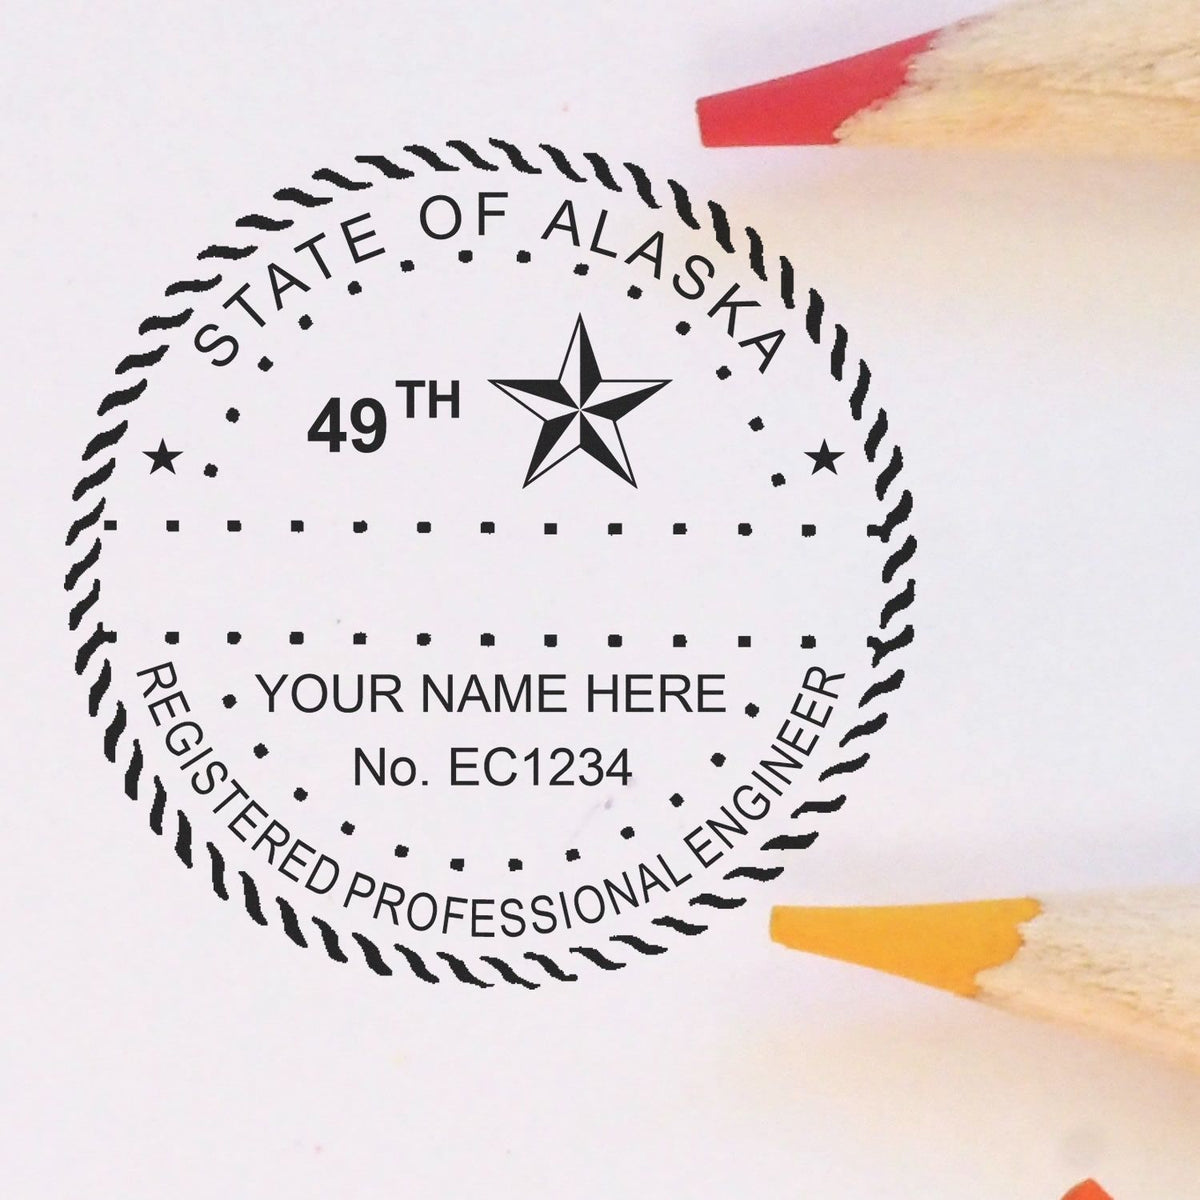 A lifestyle photo showing a stamped image of the Alaska Professional Engineer Seal Stamp on a piece of paper